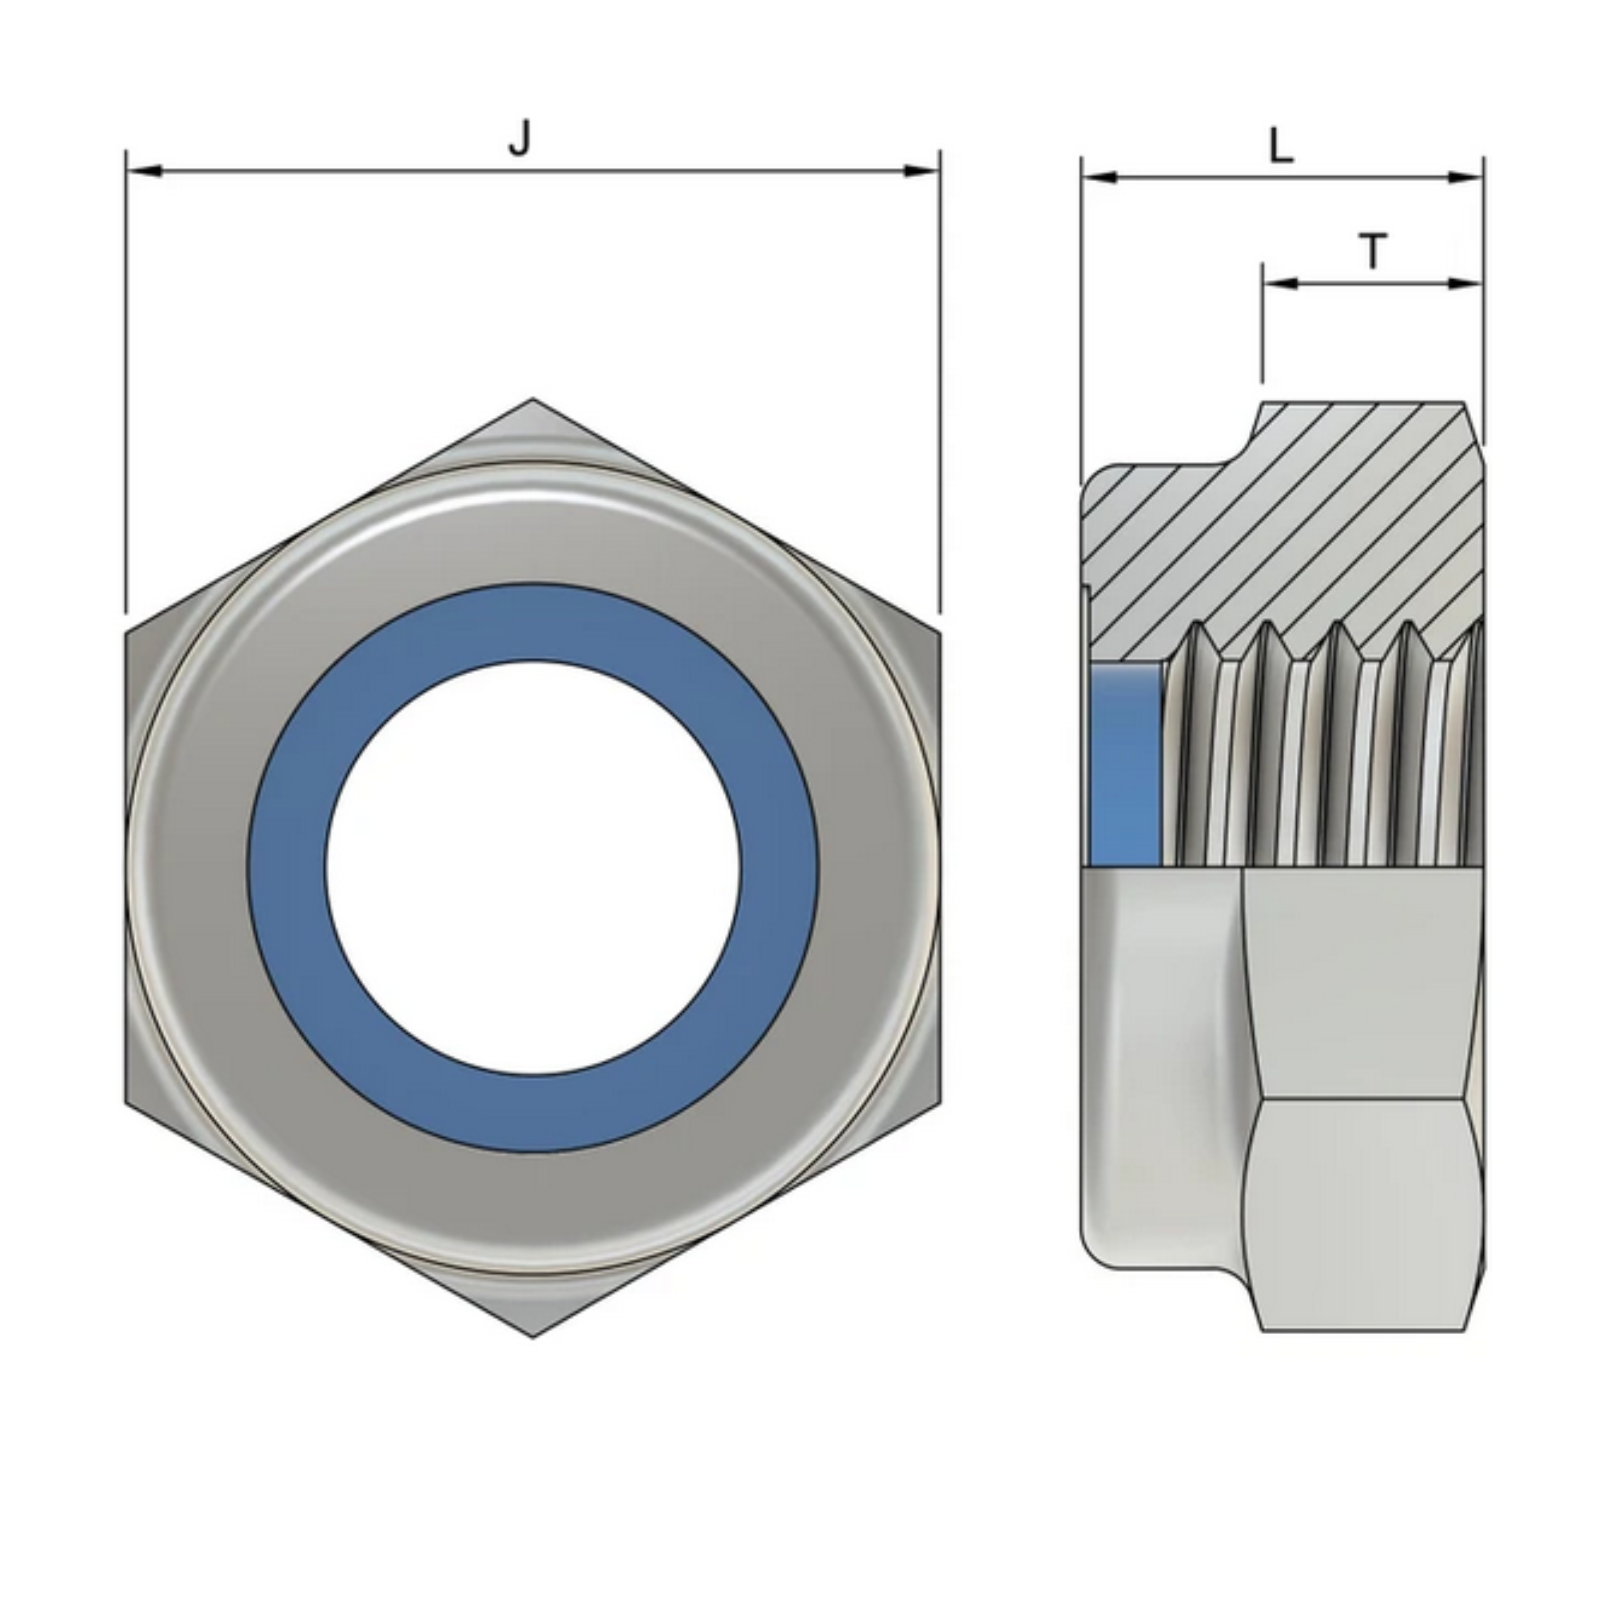 M8 Hexagon Nylon Locking Nuts (DIN 985) - Stainless Steel (A4)